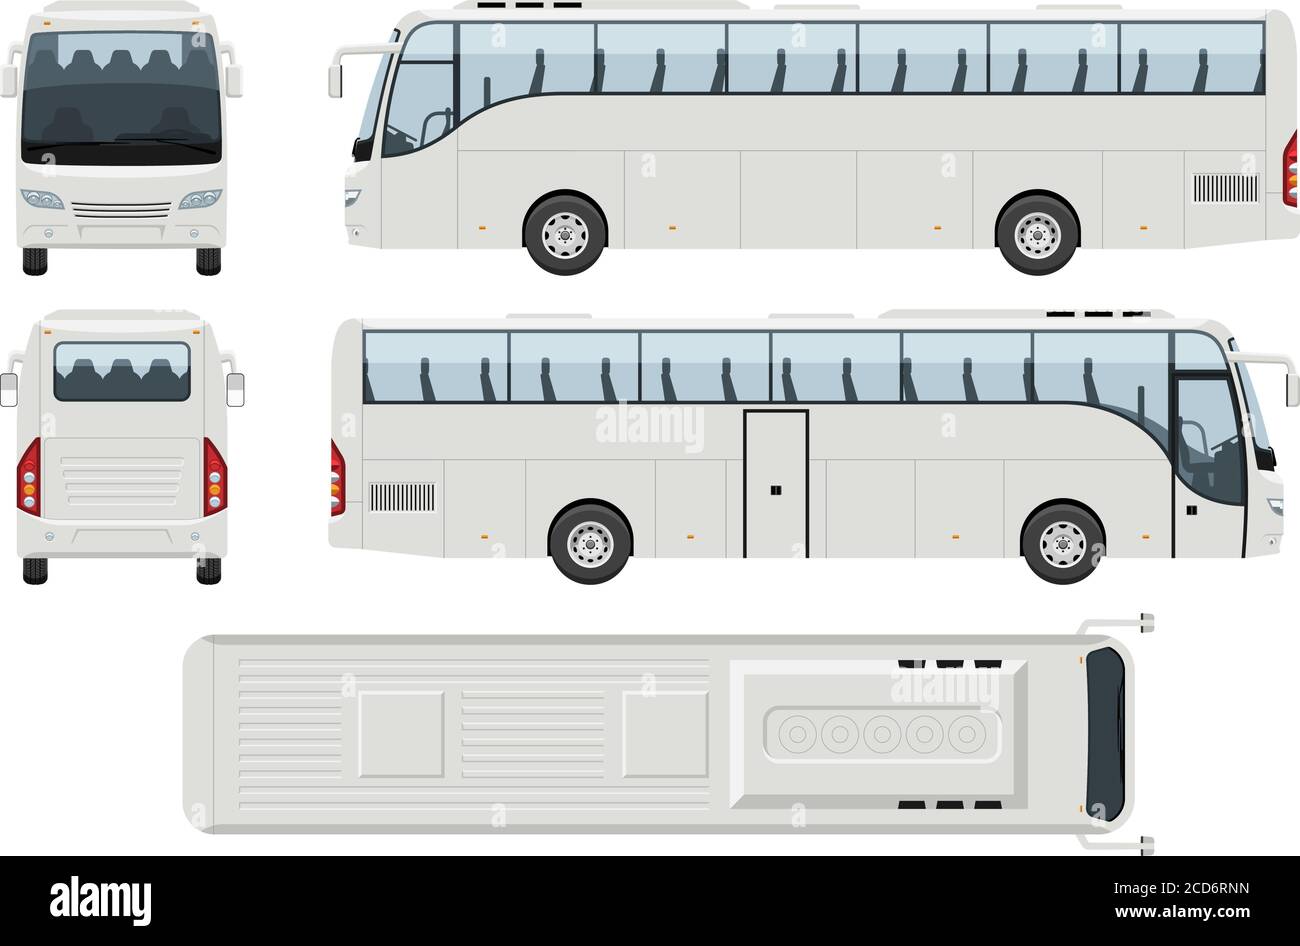 Coach bus side view Stock Vector Images - Alamy